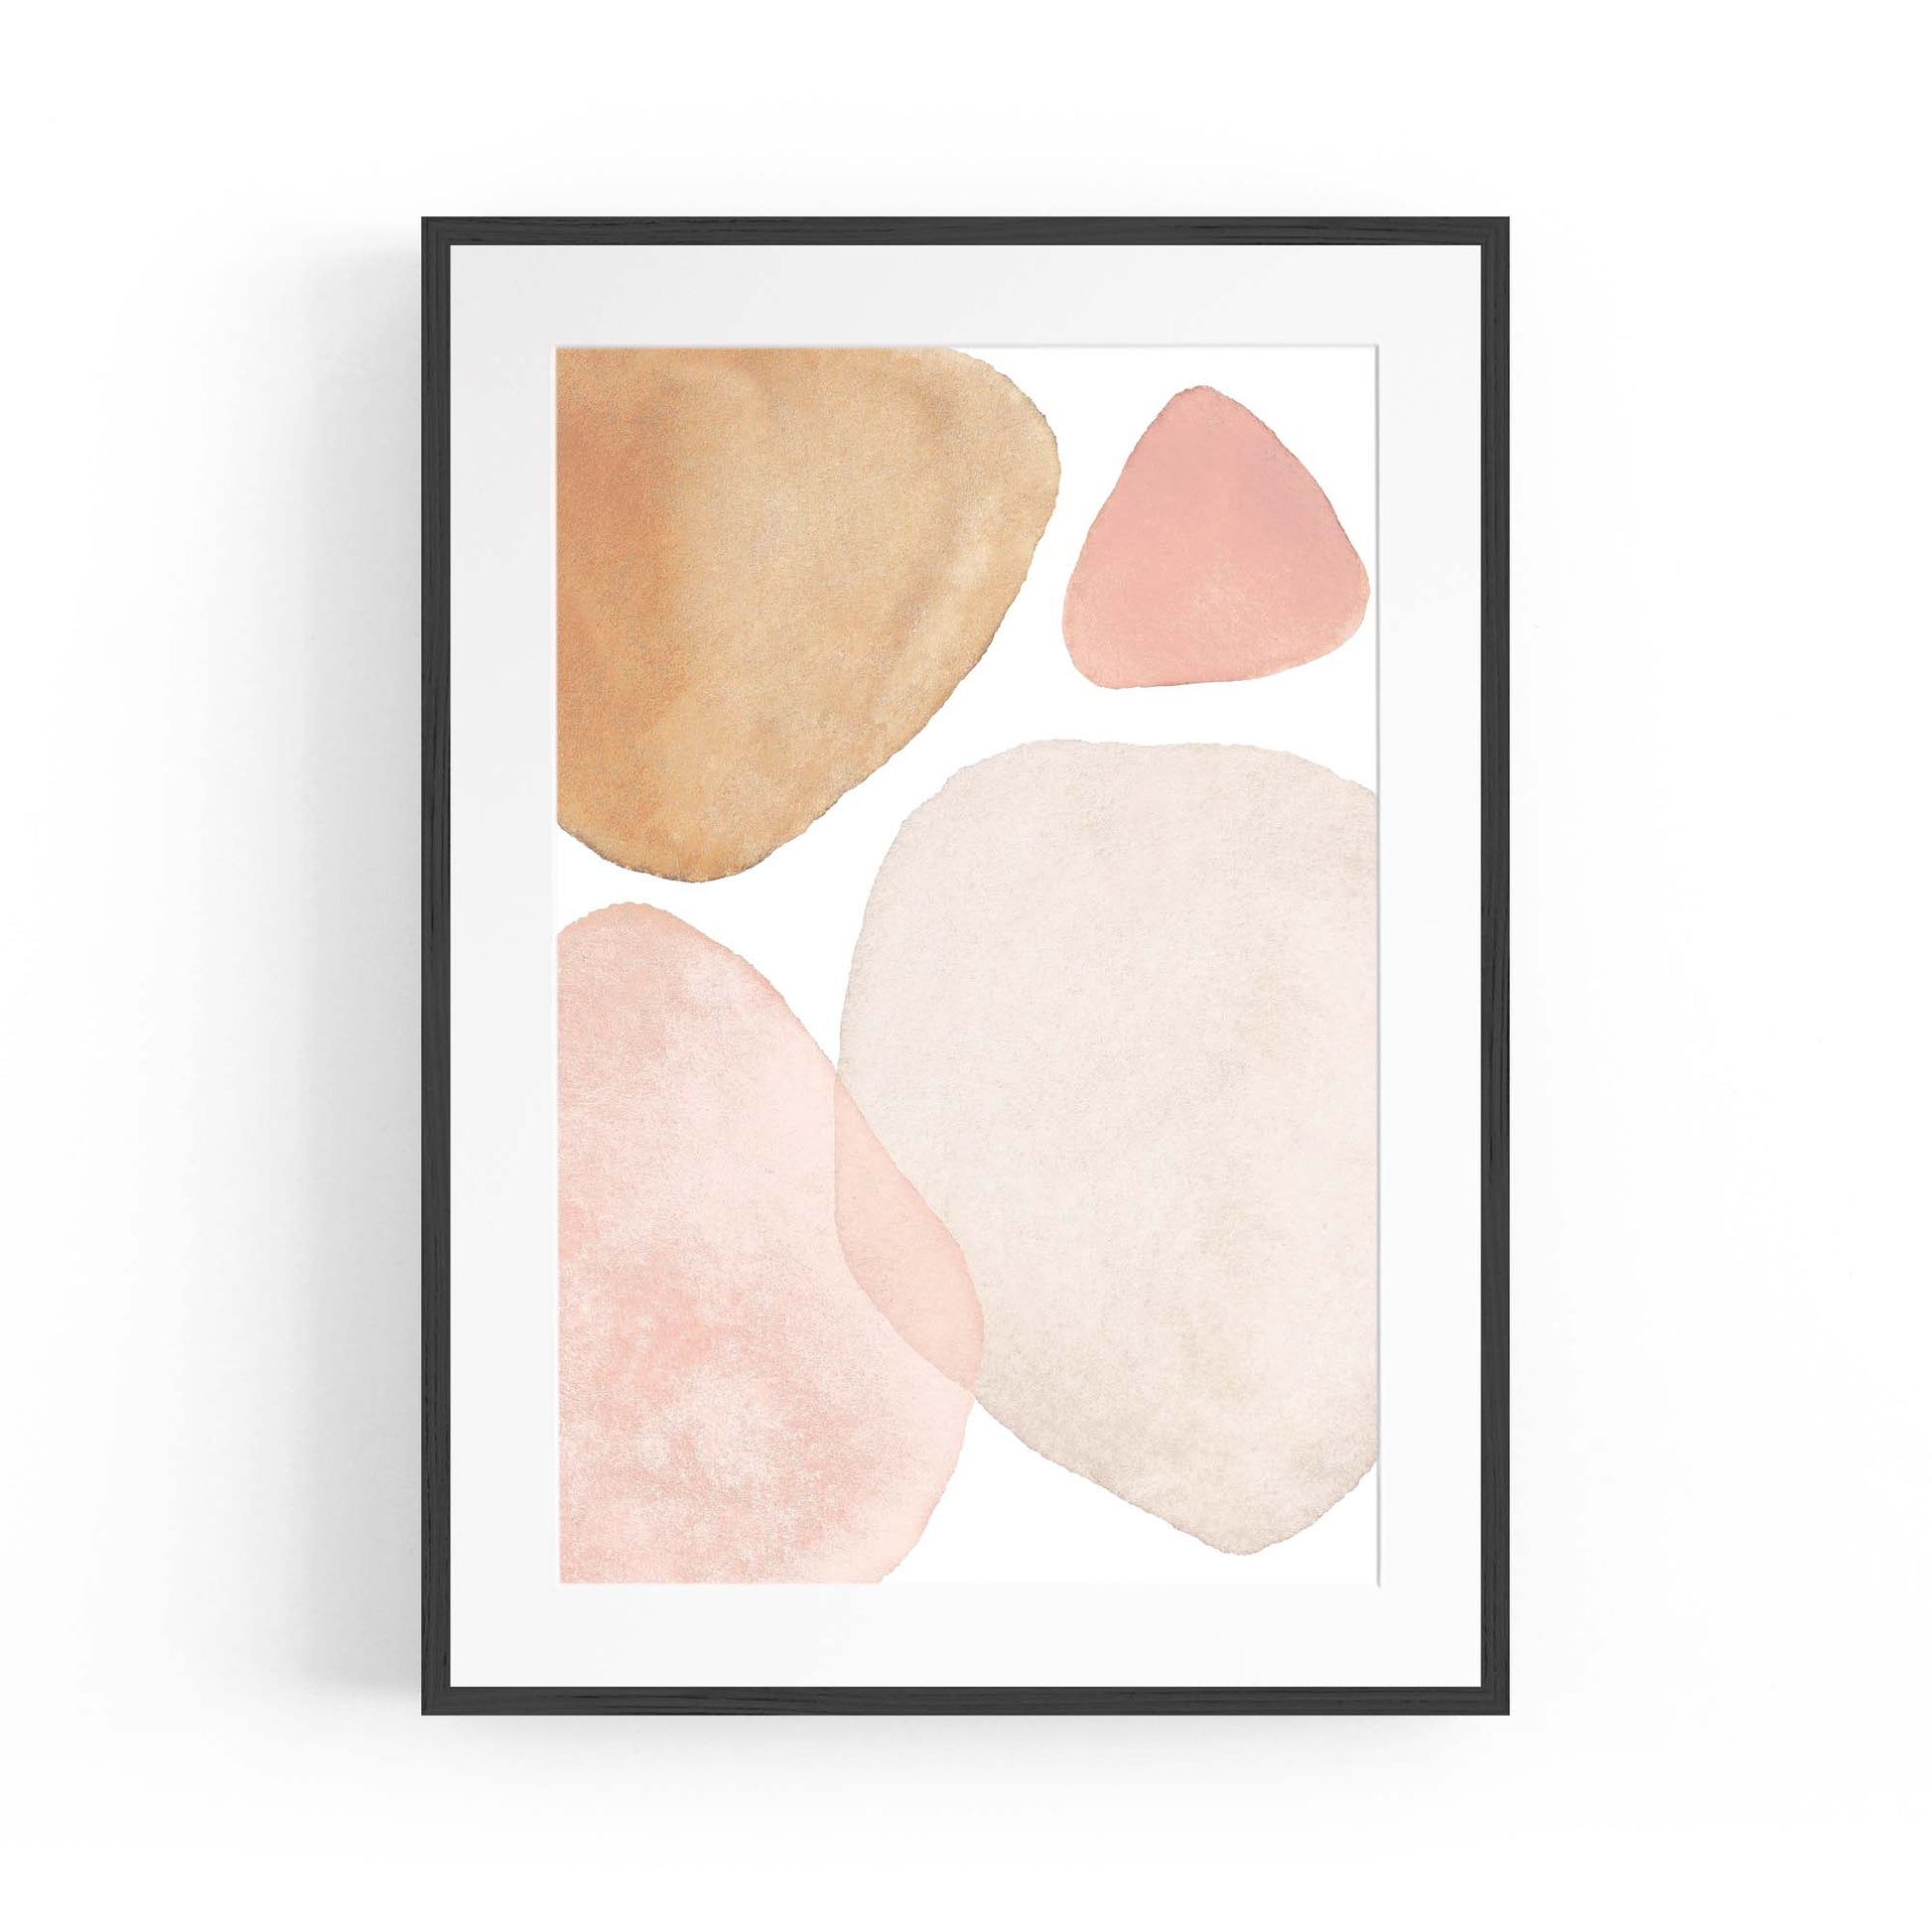 Abstract Modern Watercolour Shapes Painting Wall Art #16 - The Affordable Art Company